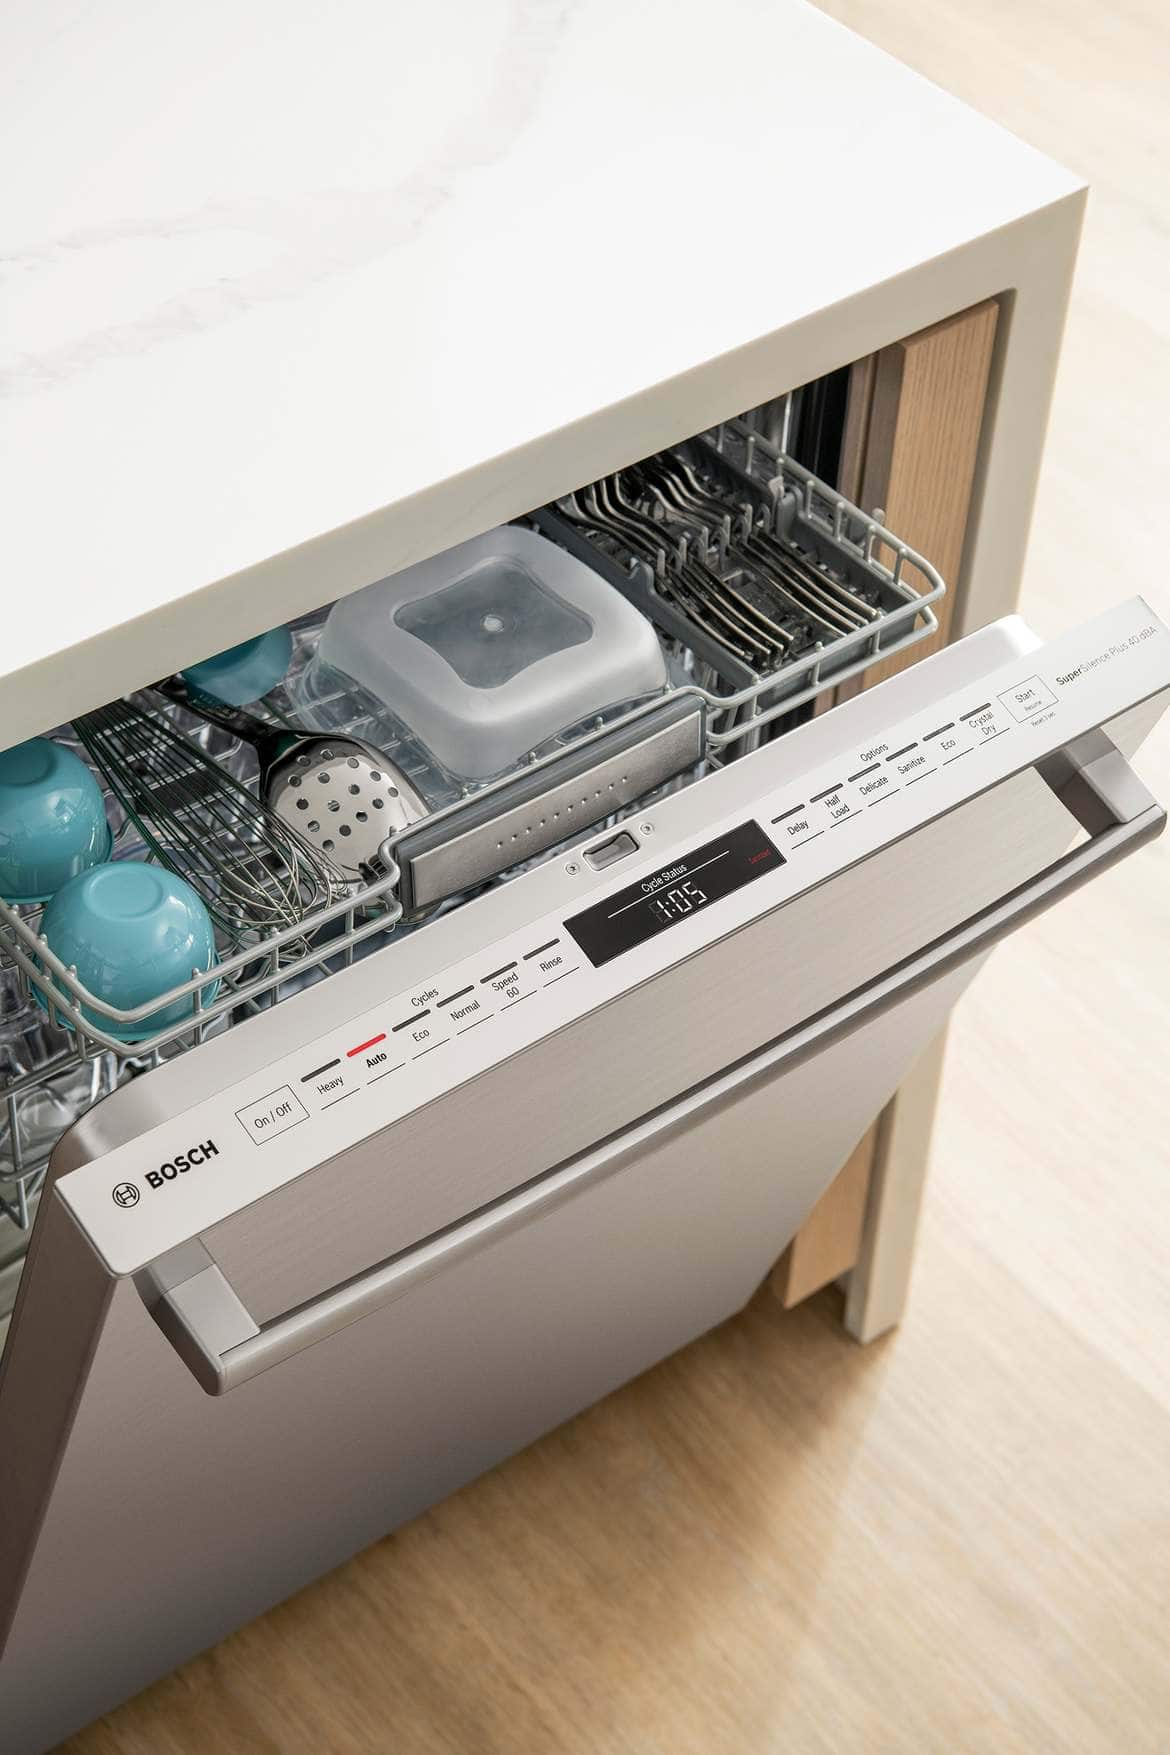 Why Is My Bosch Dishwasher Not Drying Dishes? - Best Service Company